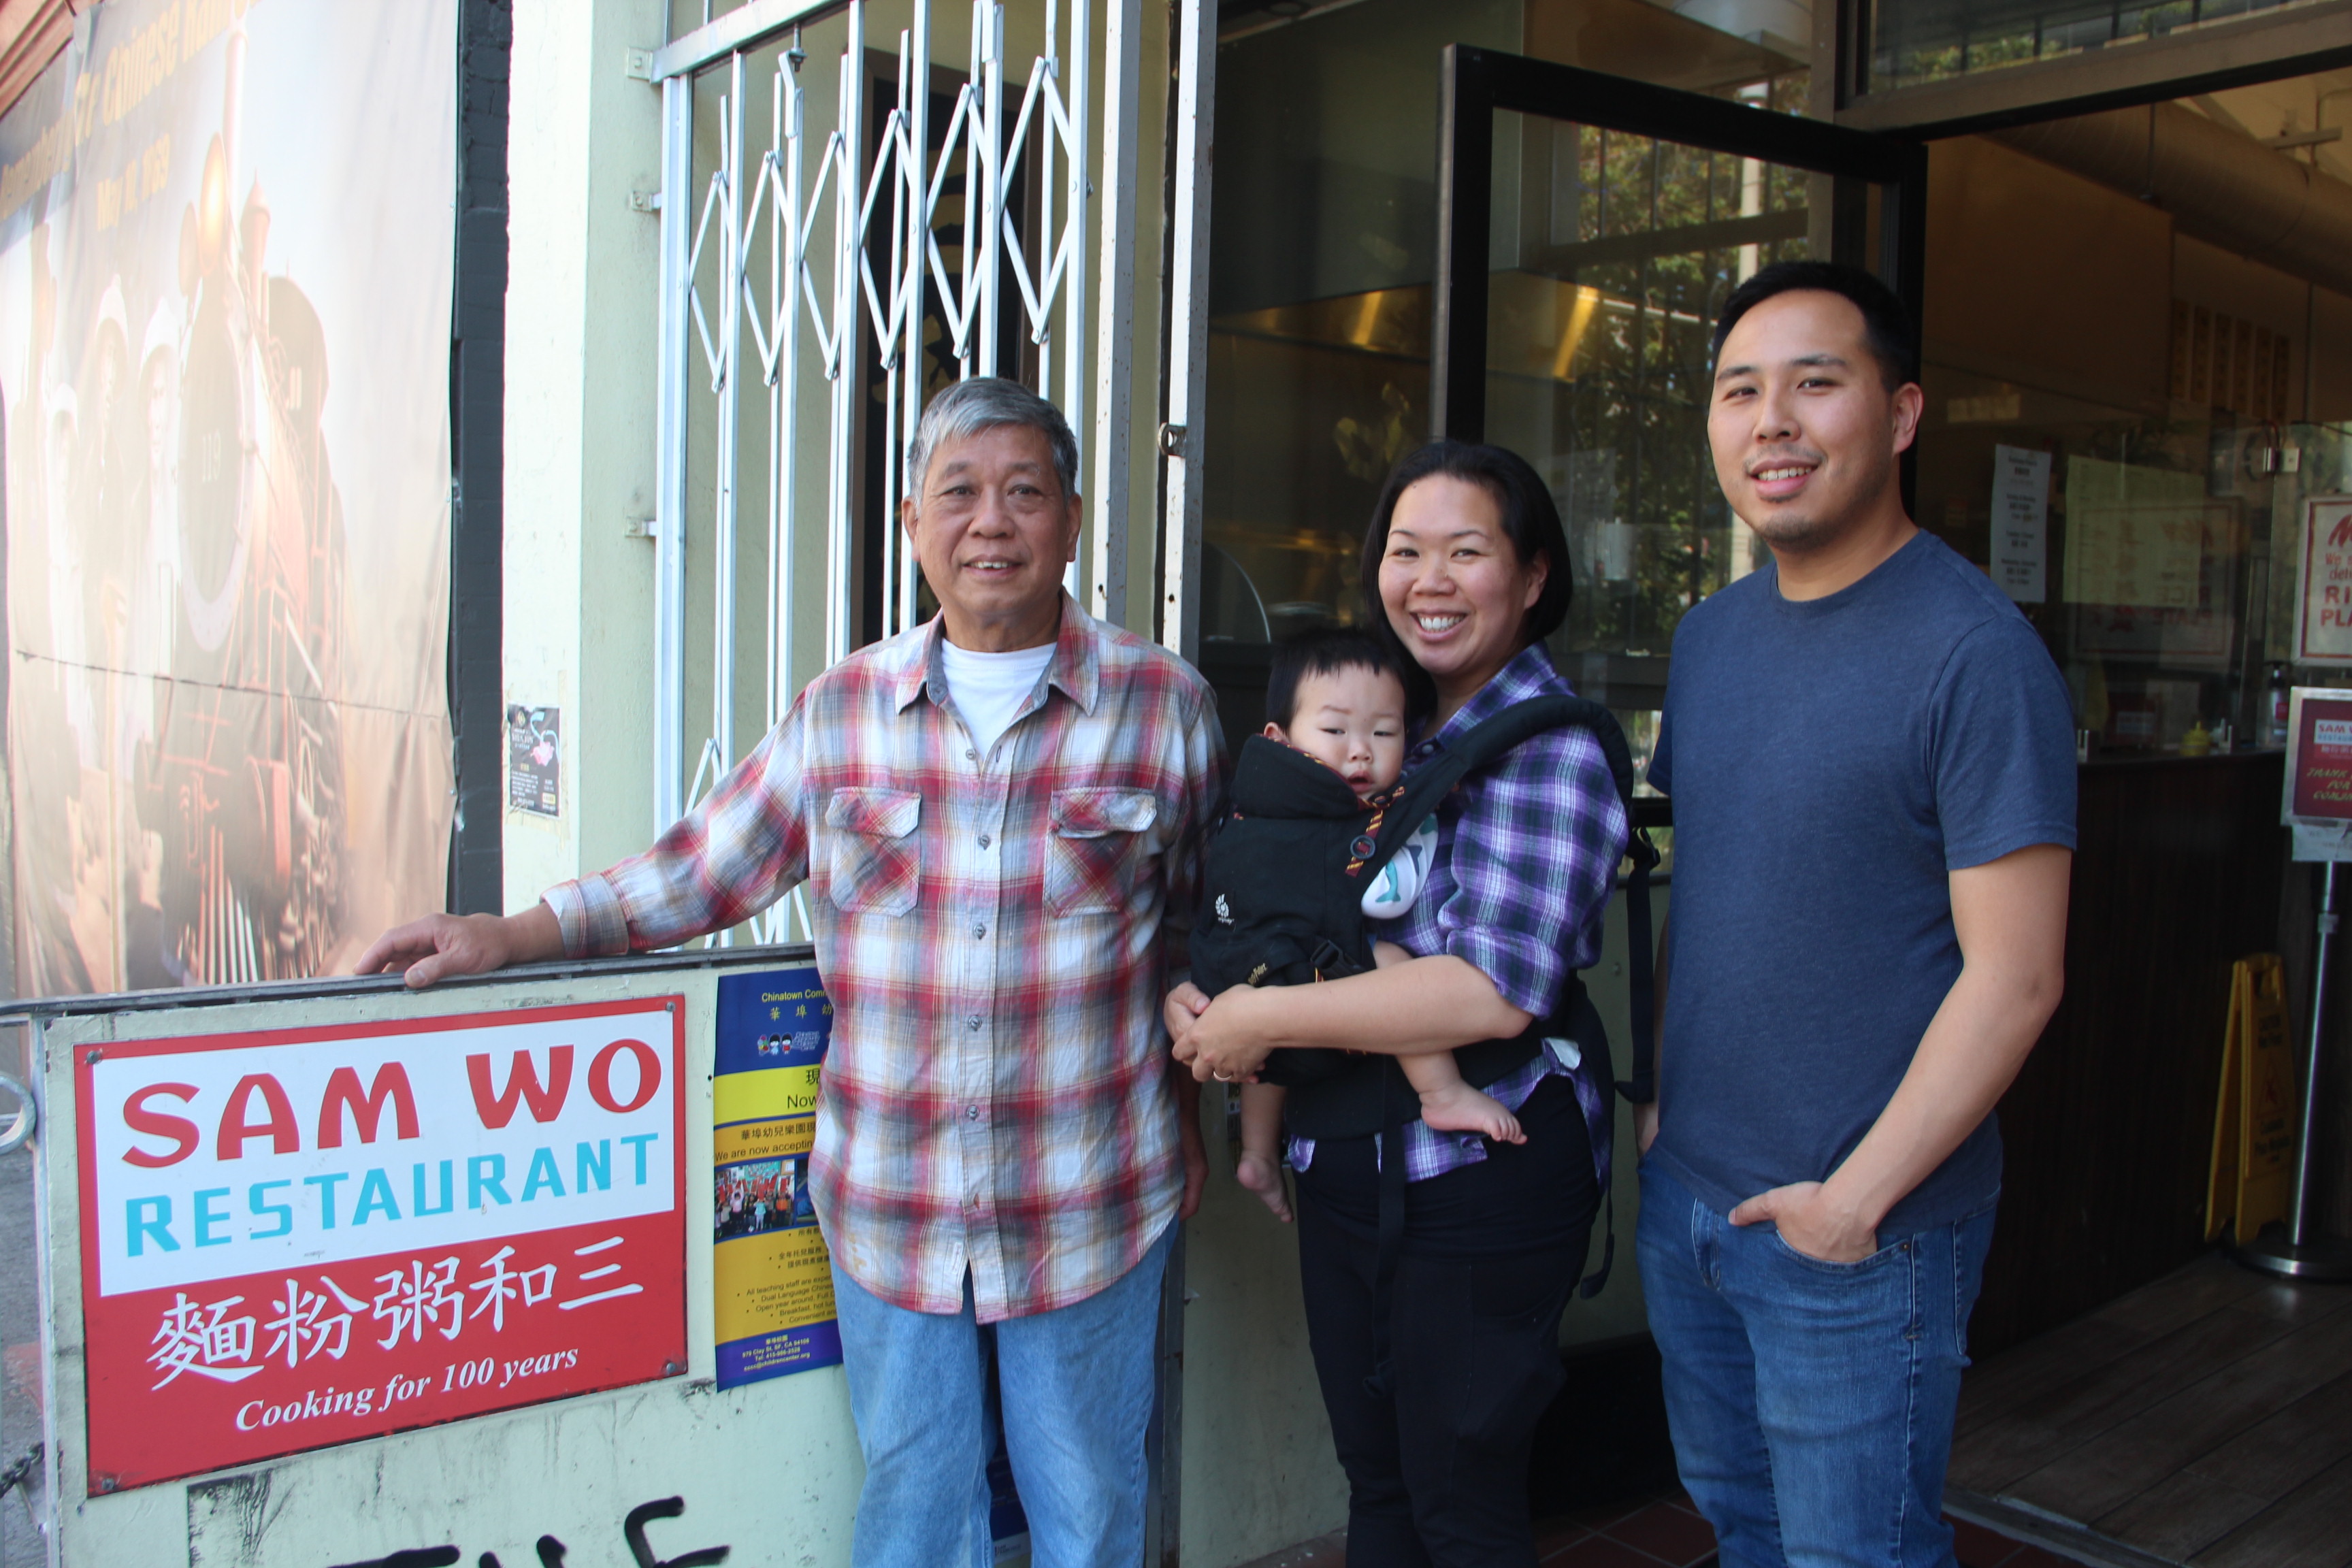 This Family Owns a Century-Old San Francisco Chinese Restaurant. Now They’re Saying Goodbye